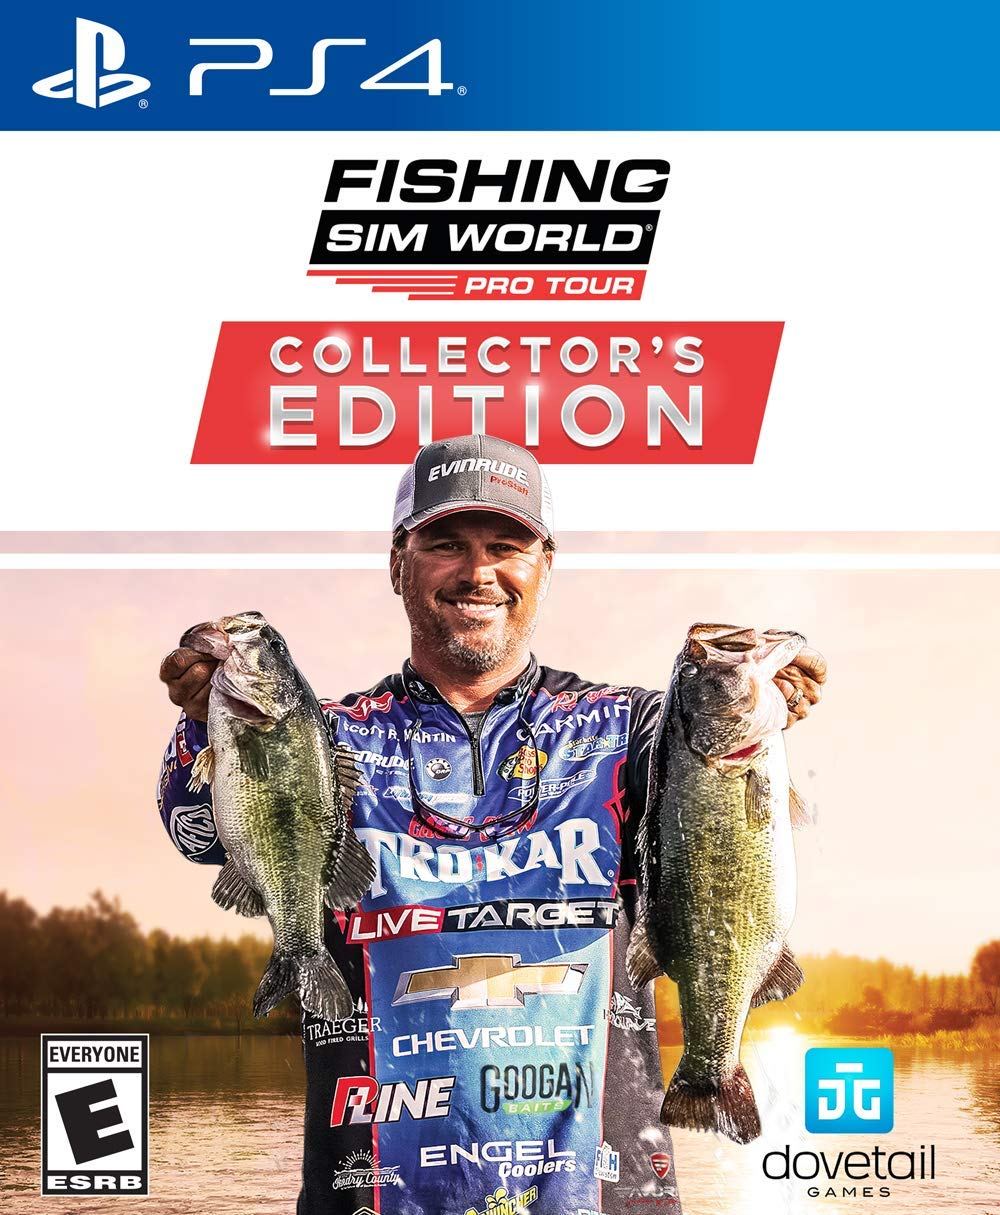 Fishing Sim World Pro Tour [Collector's Edition] for PlayStation 4